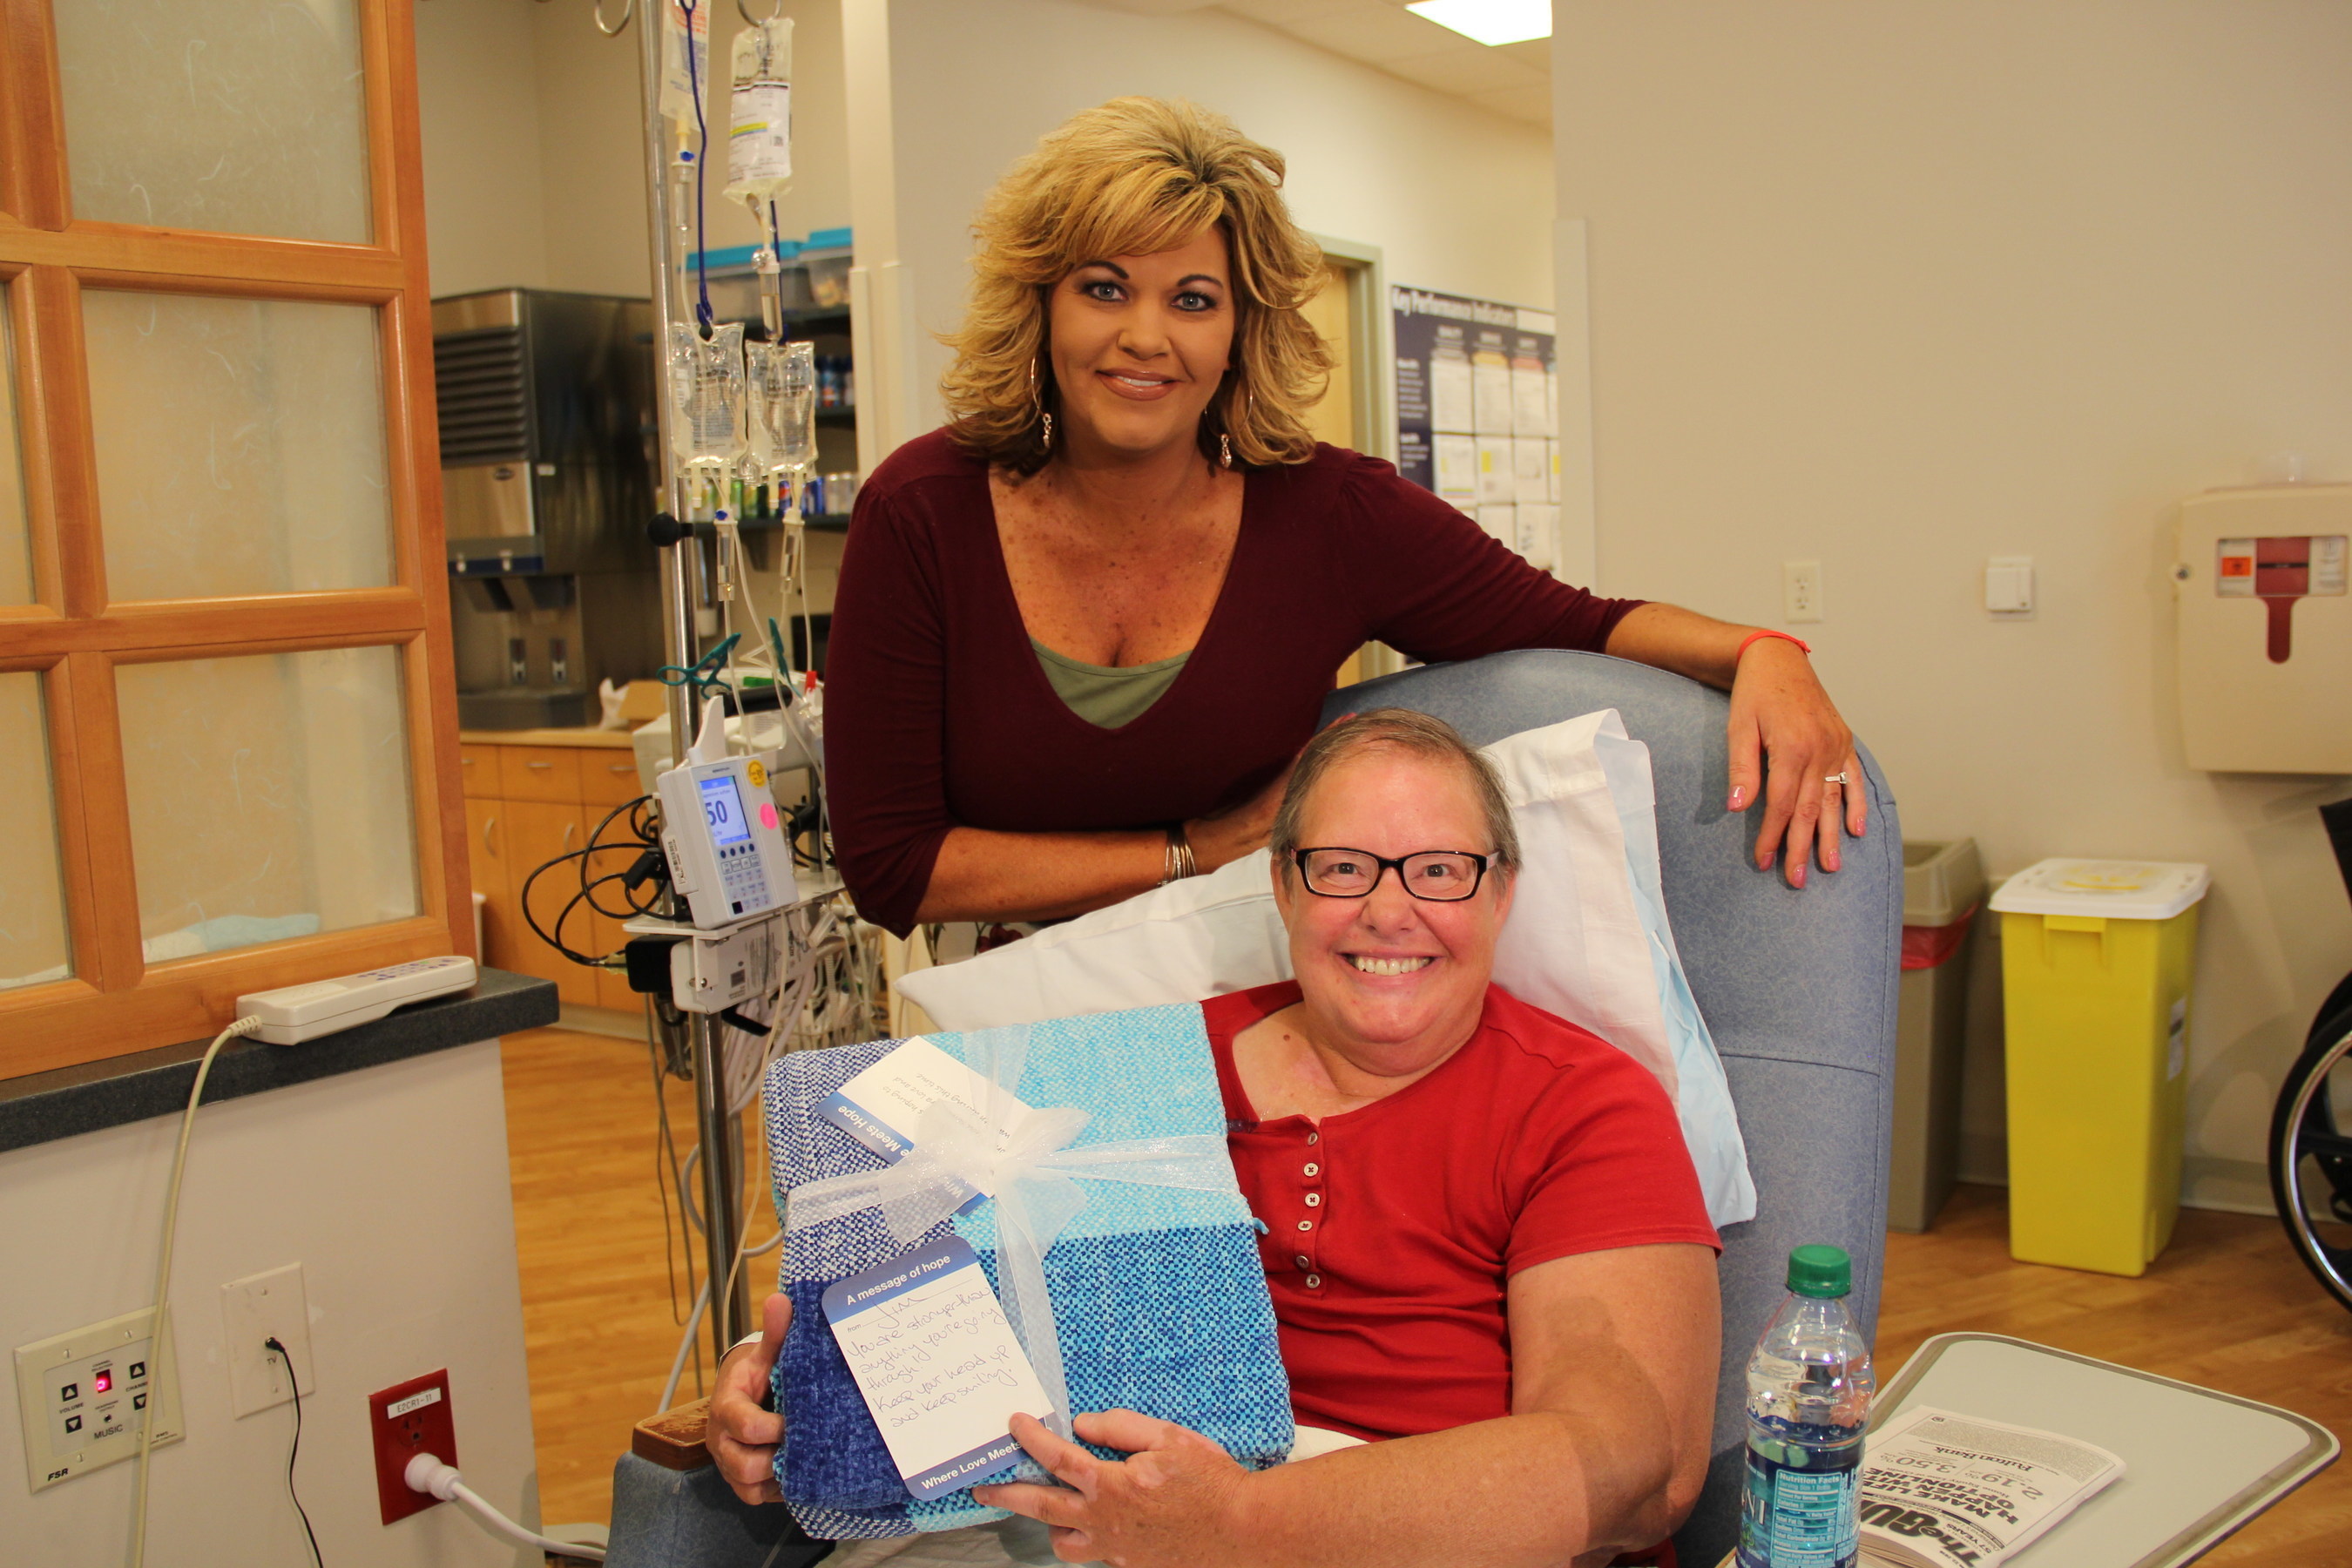 Wendy Schiavone, Sales Manager at Gateway Subaru, donates the first blanket to patient Brenda Rathel of Hebron, MD.